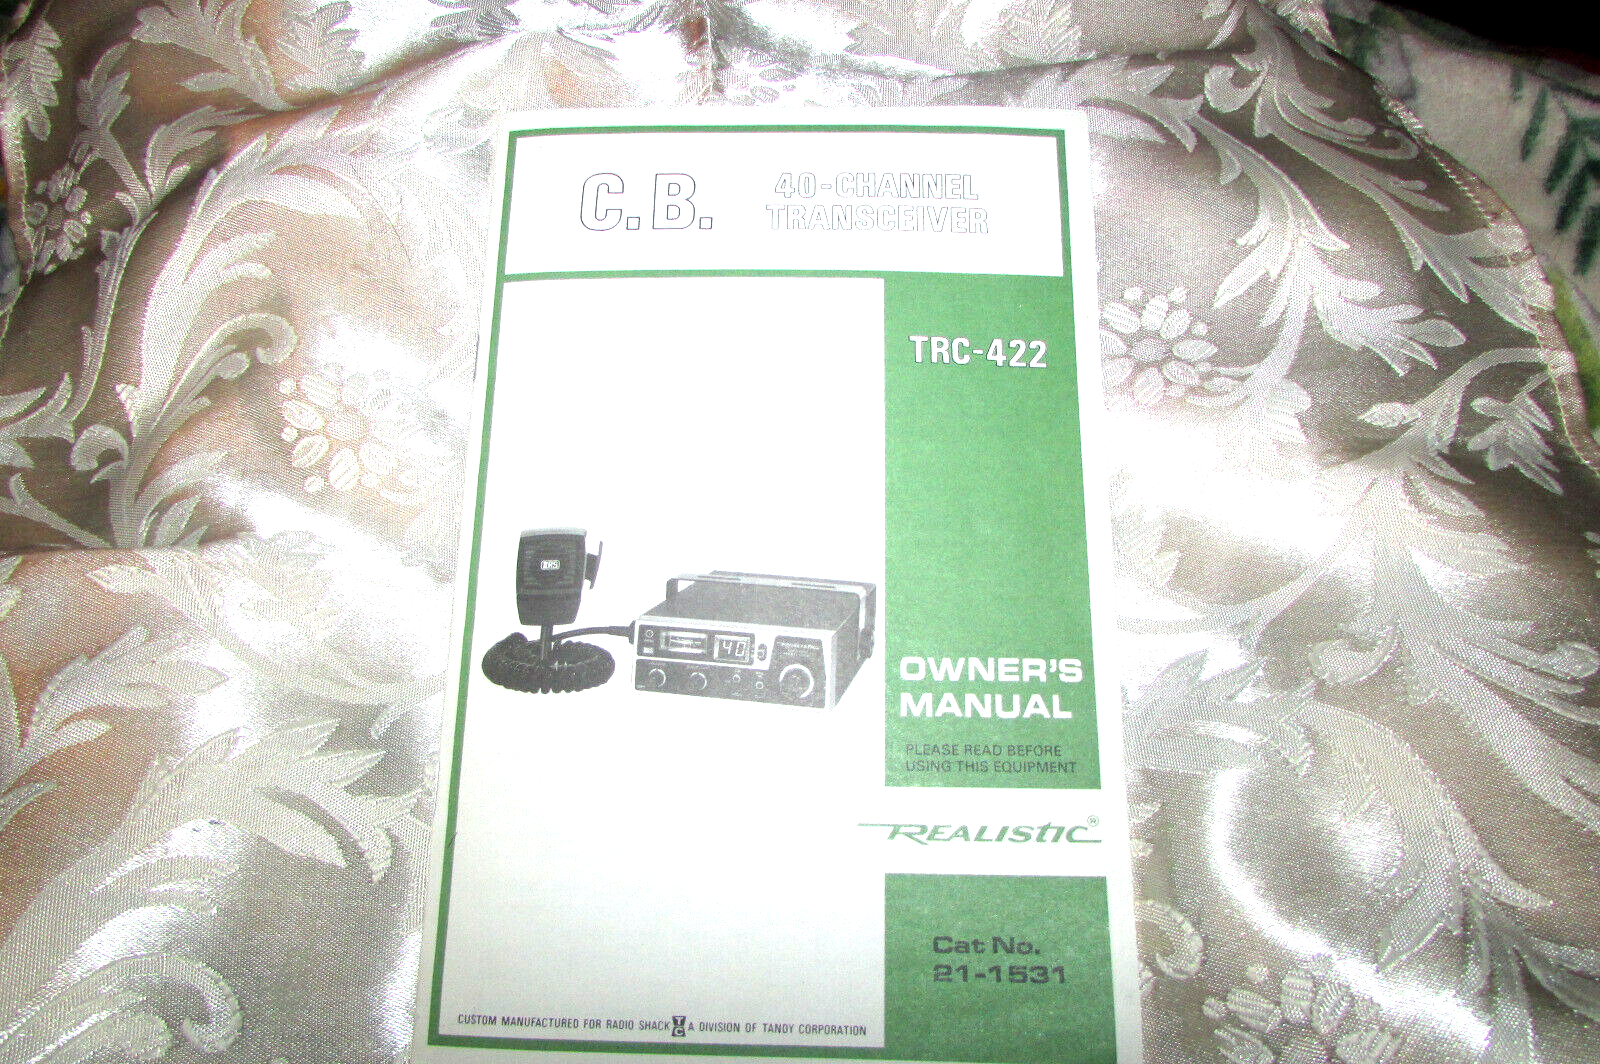 MANUAL (owner's) for C.B. 40 CHANNEL TRANSCEIVER Realistic TRC-422 (library) - $9.90